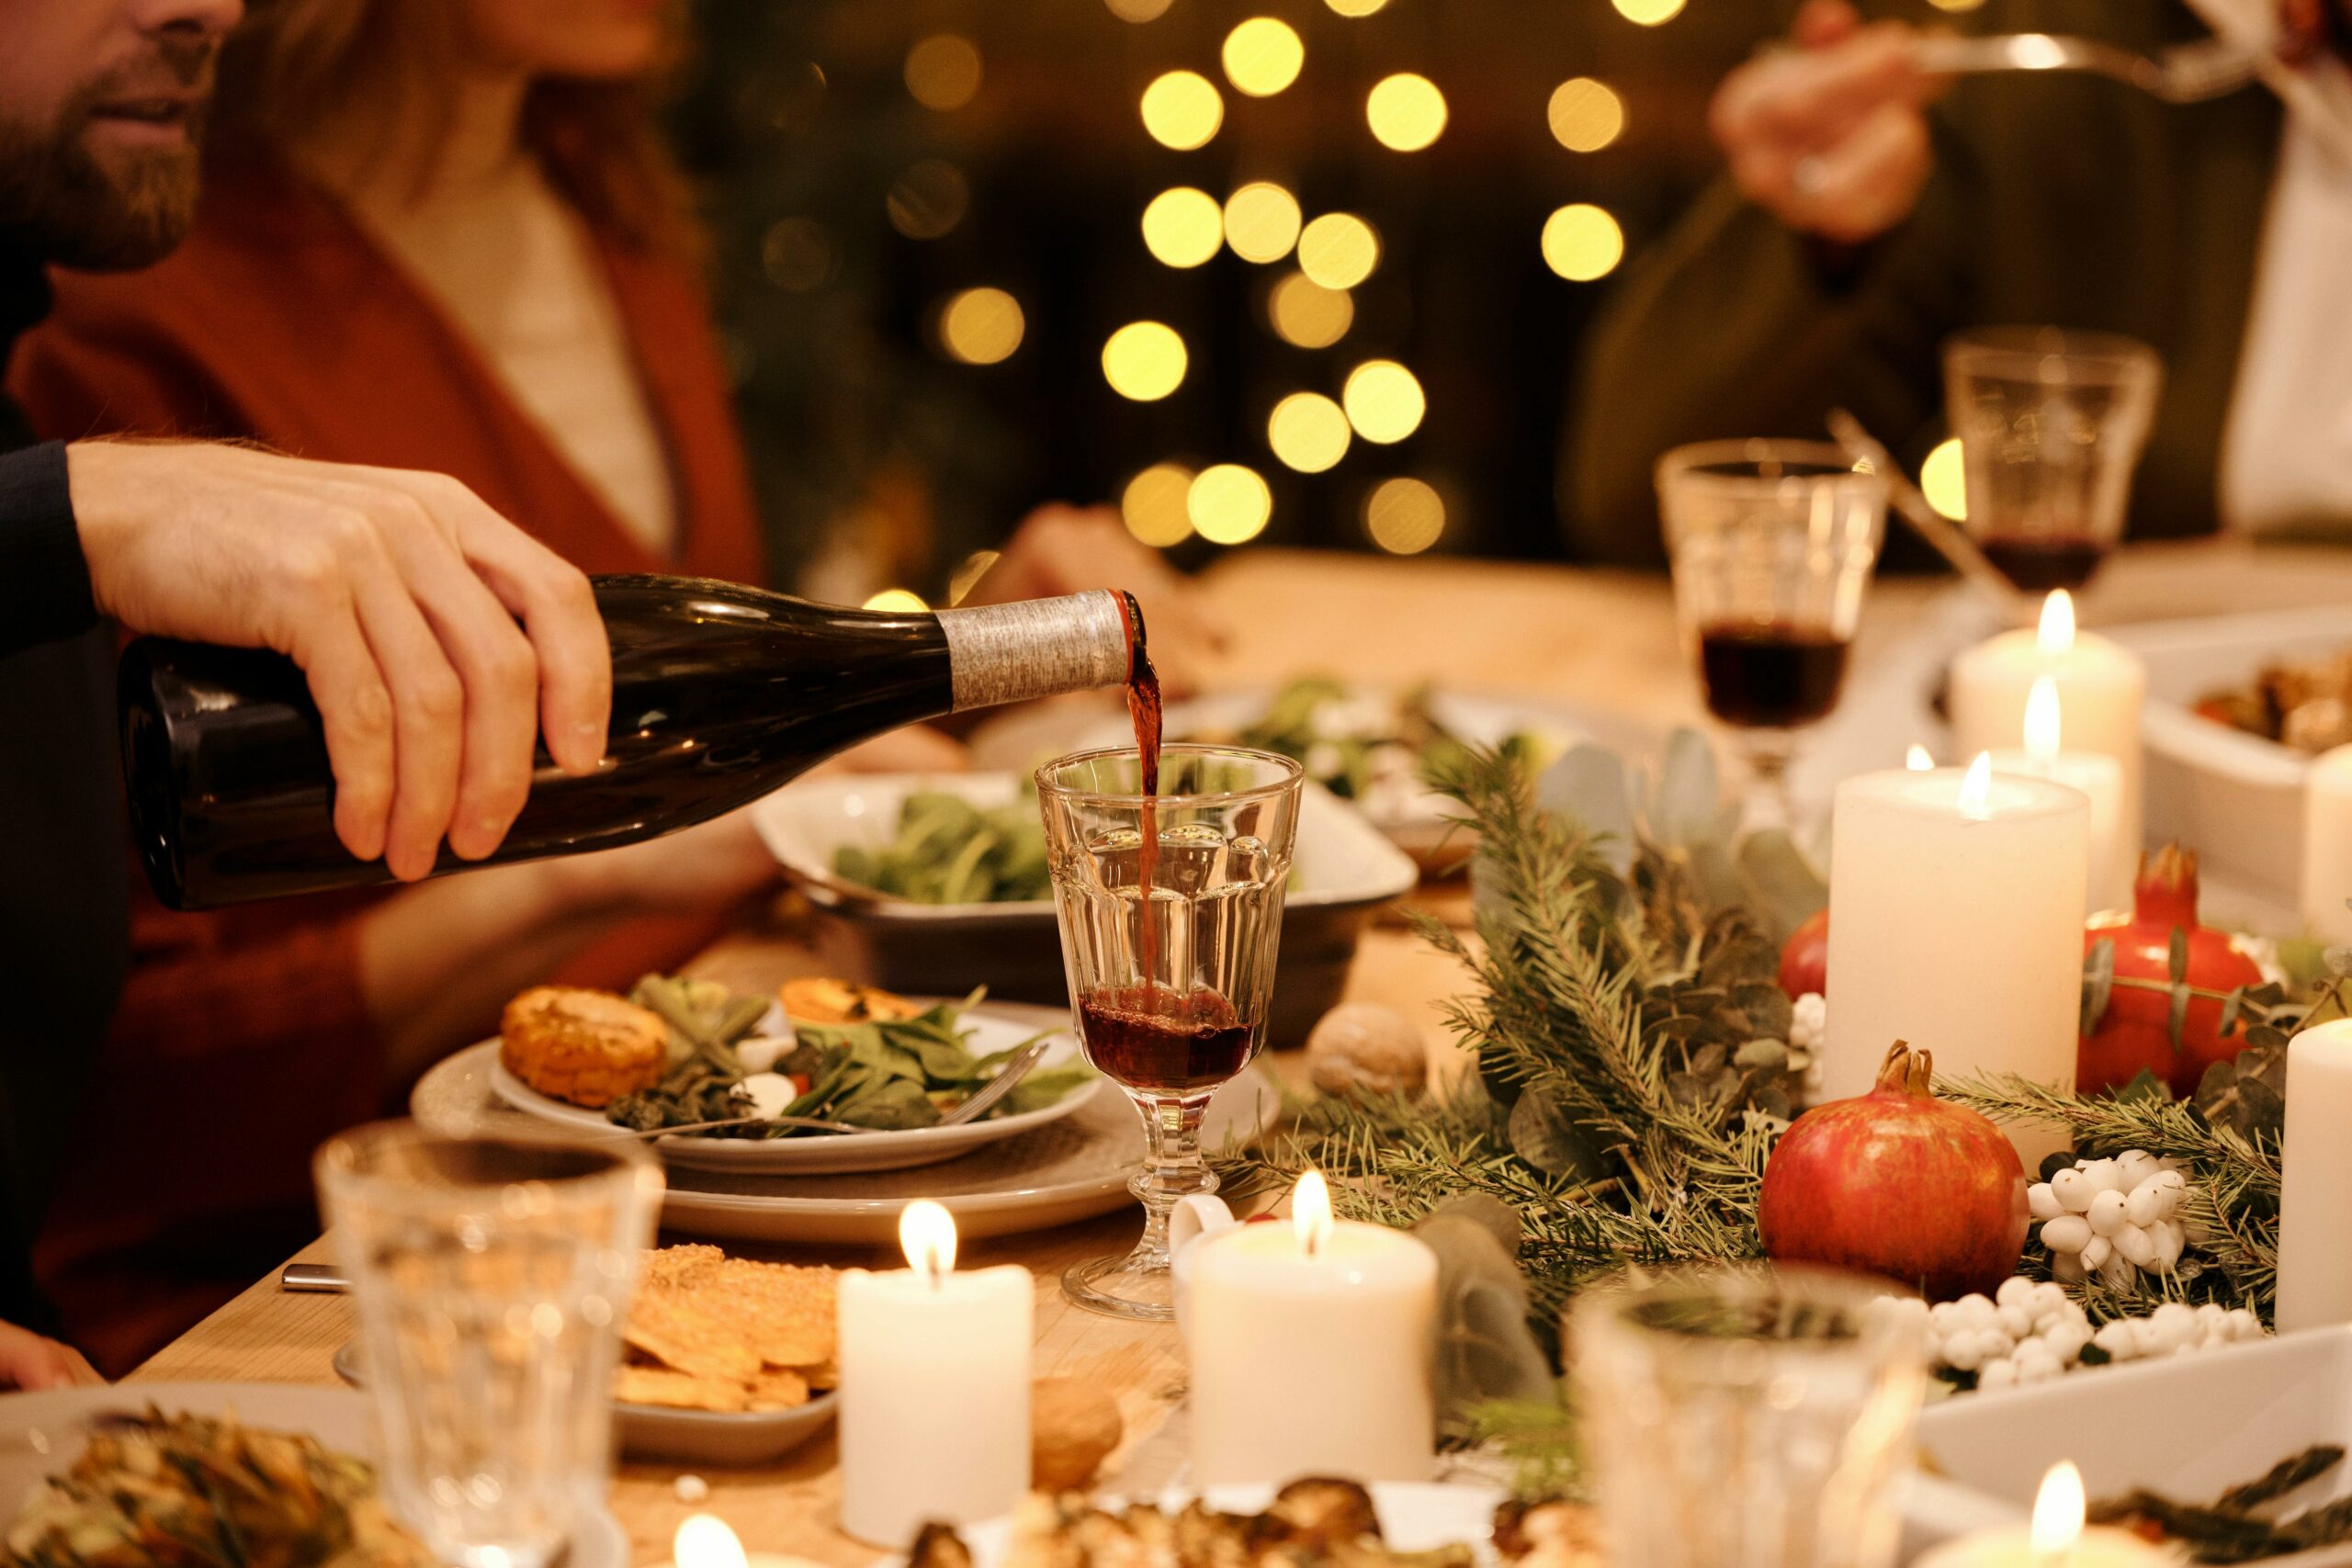 Someone out of frame is pouring a bottle of red wine into a wine glass at a holiday dinner table. There are short, white candles scattered around the table, along with table decorations such as evergreen trimmings and pomegranates. In the background are other guests at the table and out-of-focus twinkle lights.